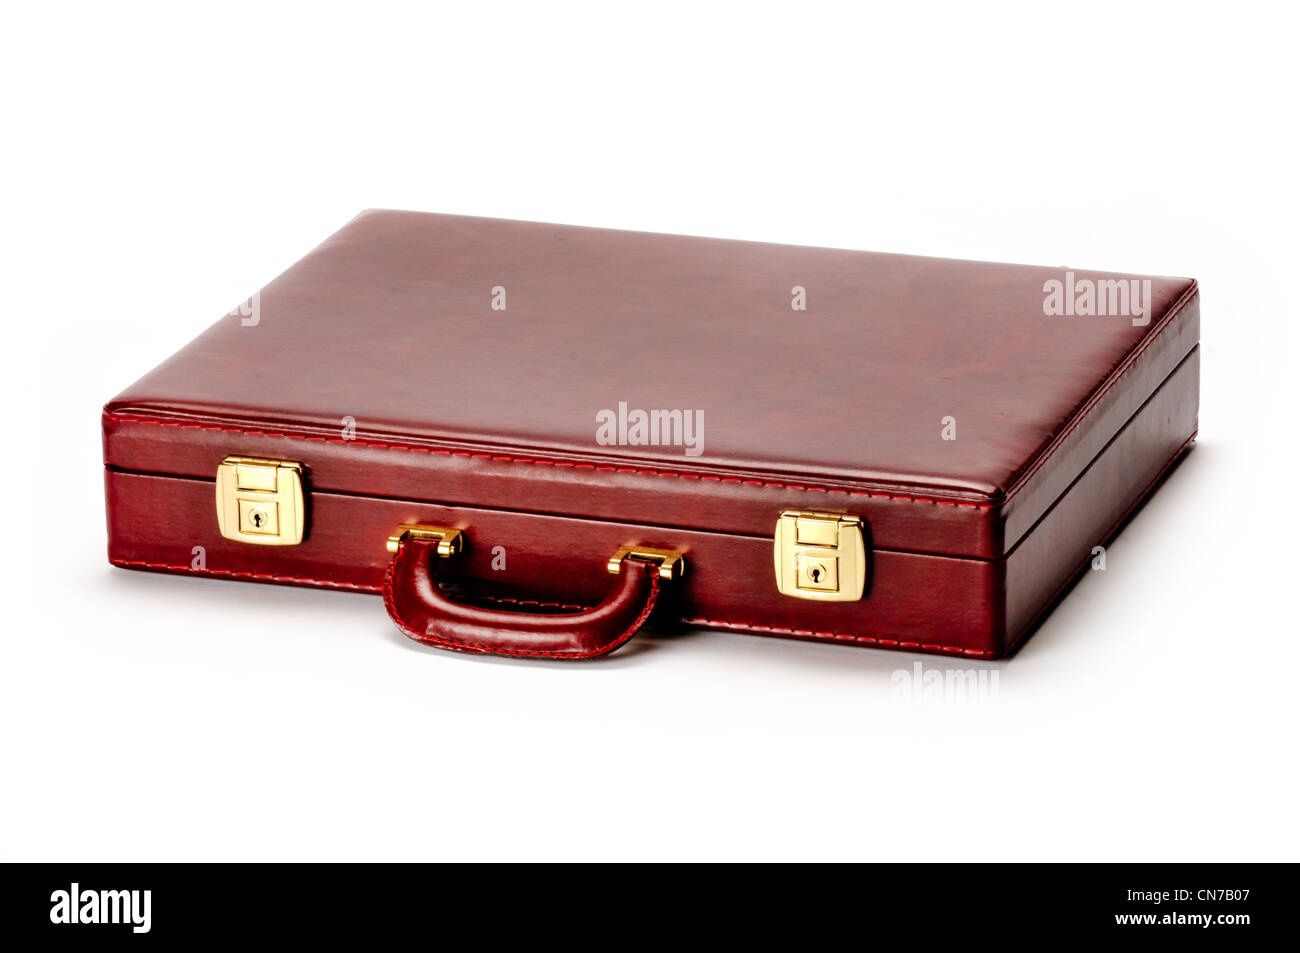 BURGANDY BROWN briefcase on white background Stock Photo